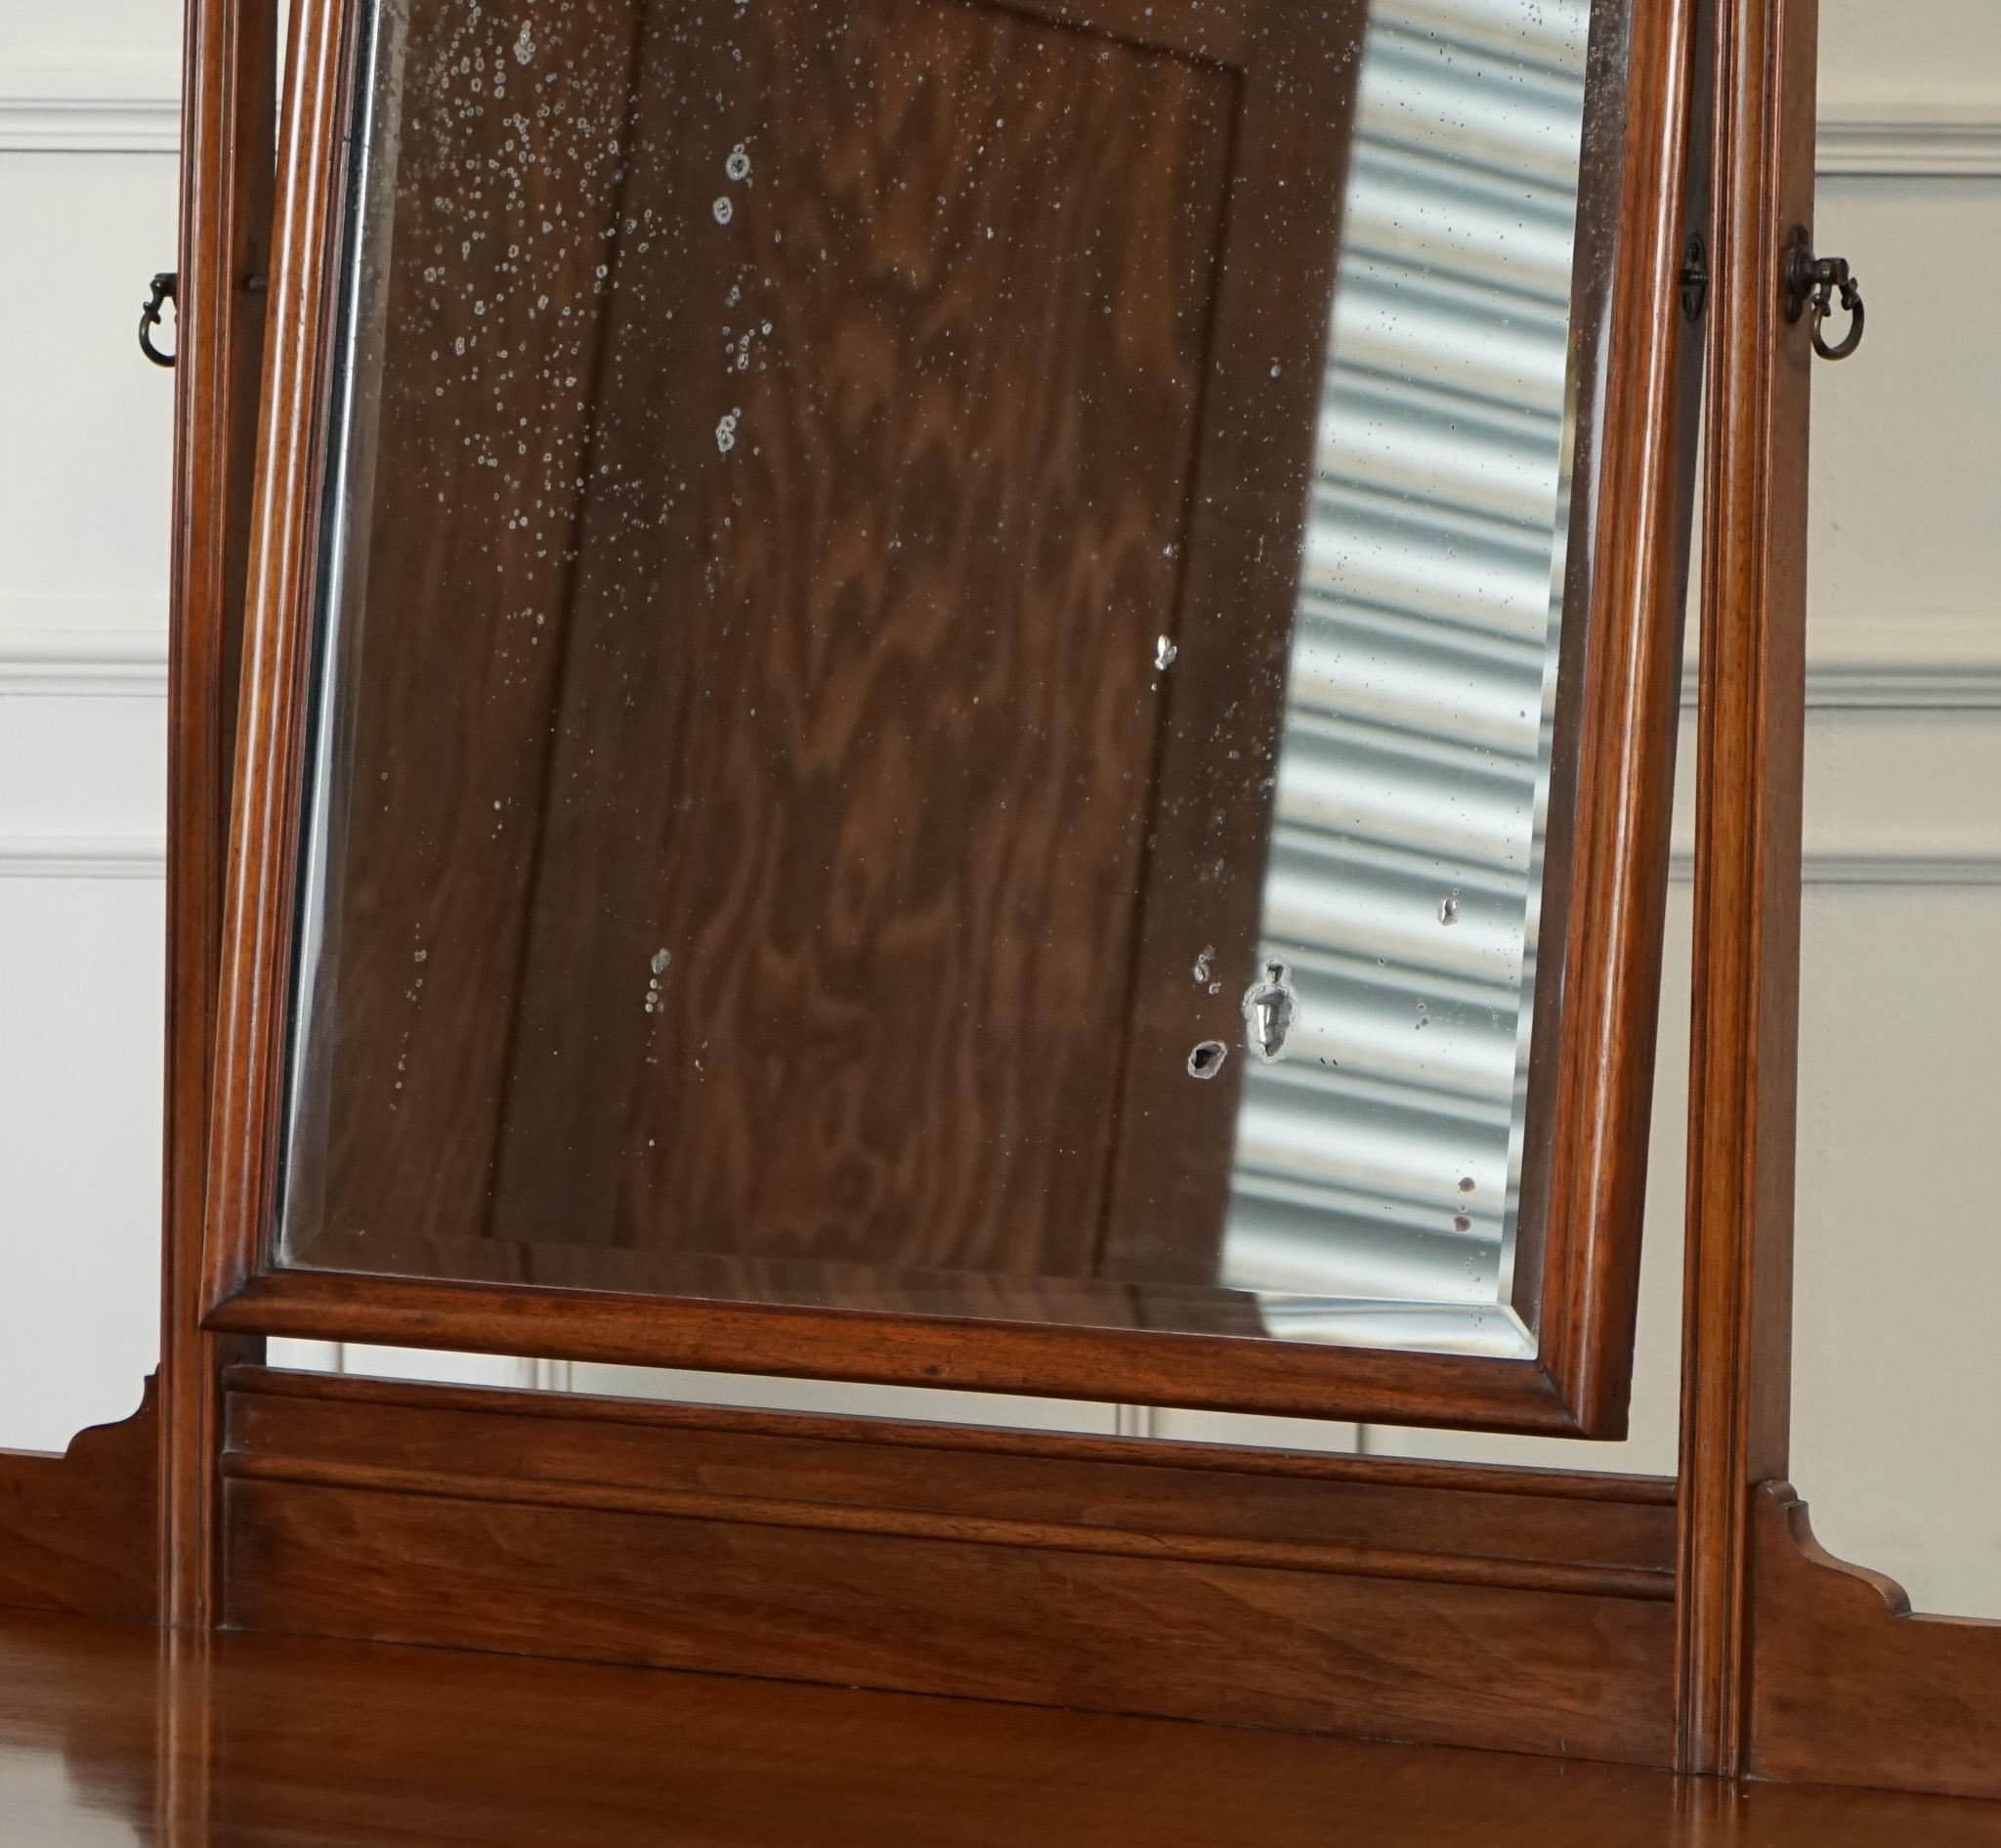 STUNNING WARING & GILLOW TRIPLE MIRROR BURR WALNUT DRESSING TABLE j1 In Good Condition For Sale In Pulborough, GB